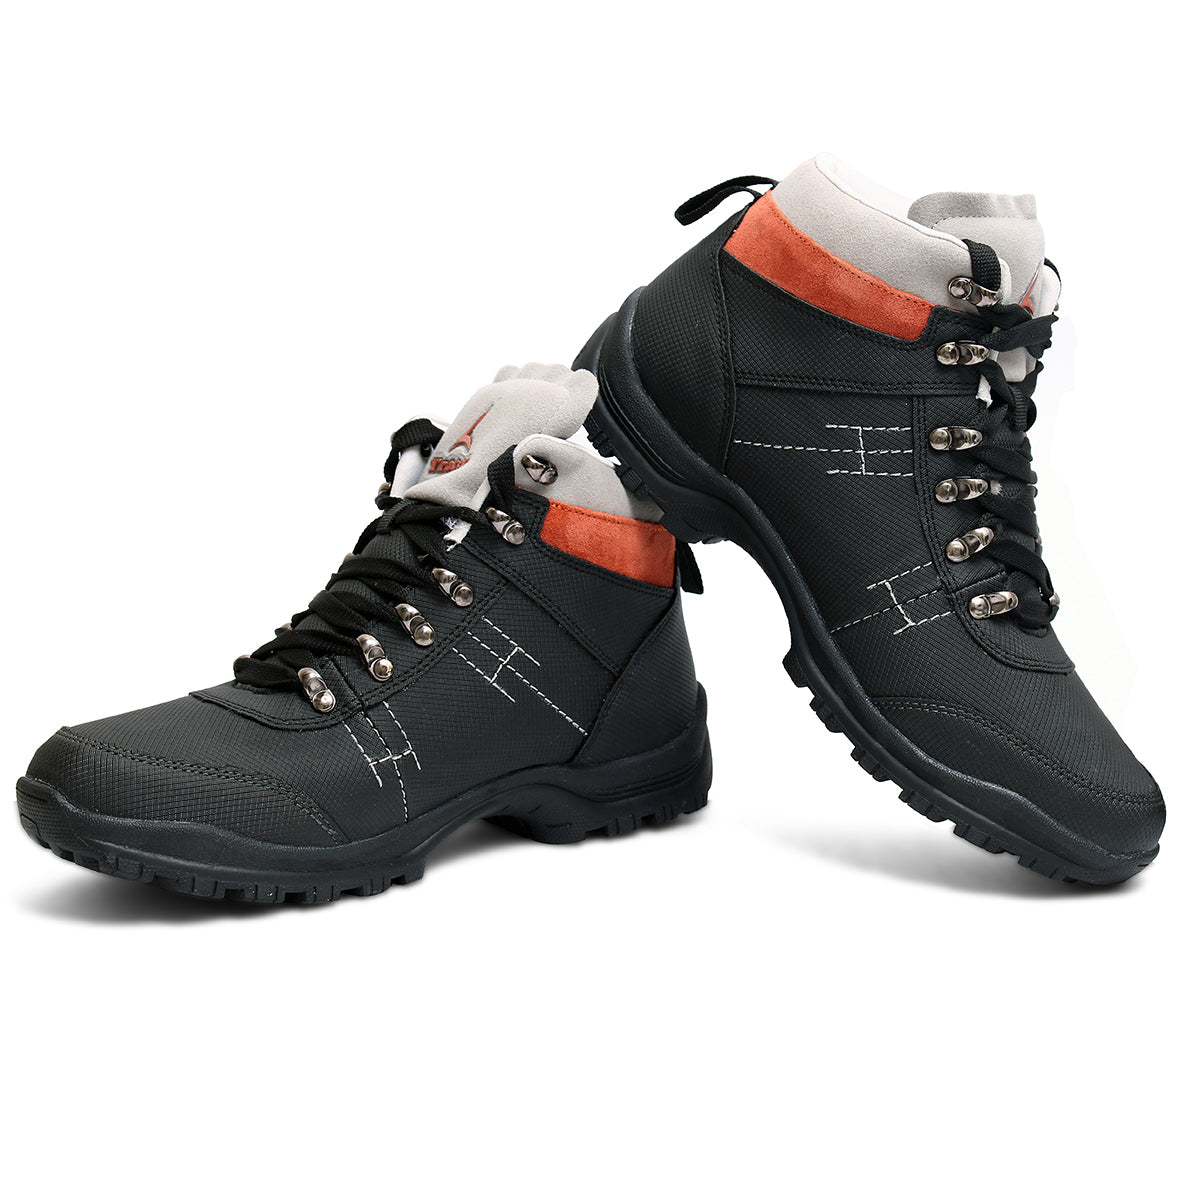 Shoes for Snow, Trekking, Hiking, Running and Walking Black